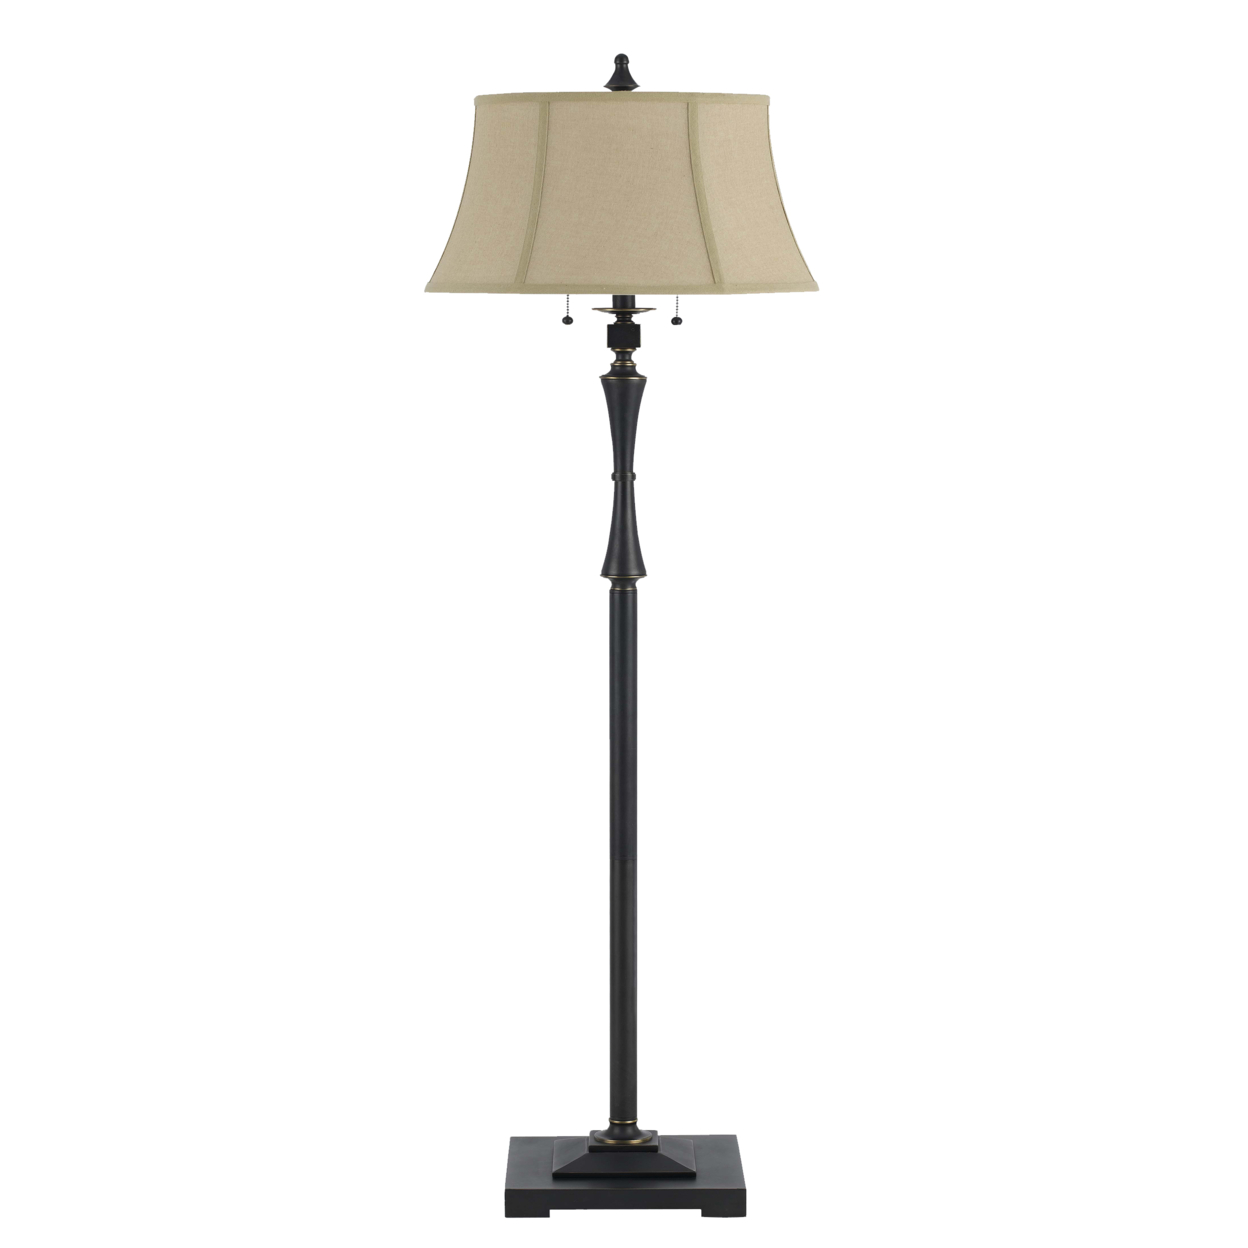 Metal Body Floor Lamp With Fabric Tapered Bell Shade, Black And Beige- Saltoro Sherpi